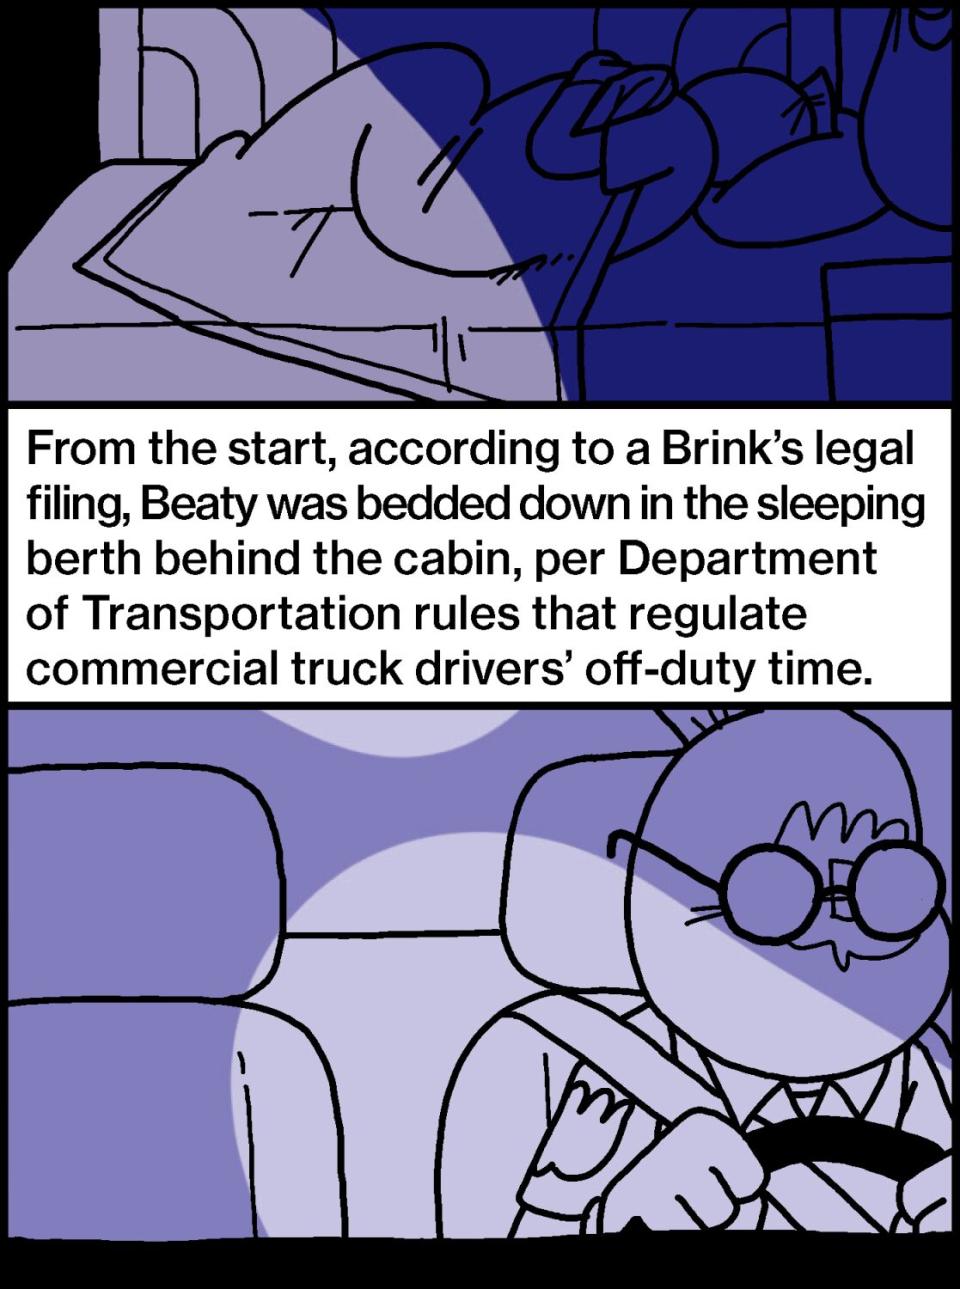 Beaty was bedded down in the sleeping berth behind the cabin, per rules that regulate commercial truck drivers off-duty time.